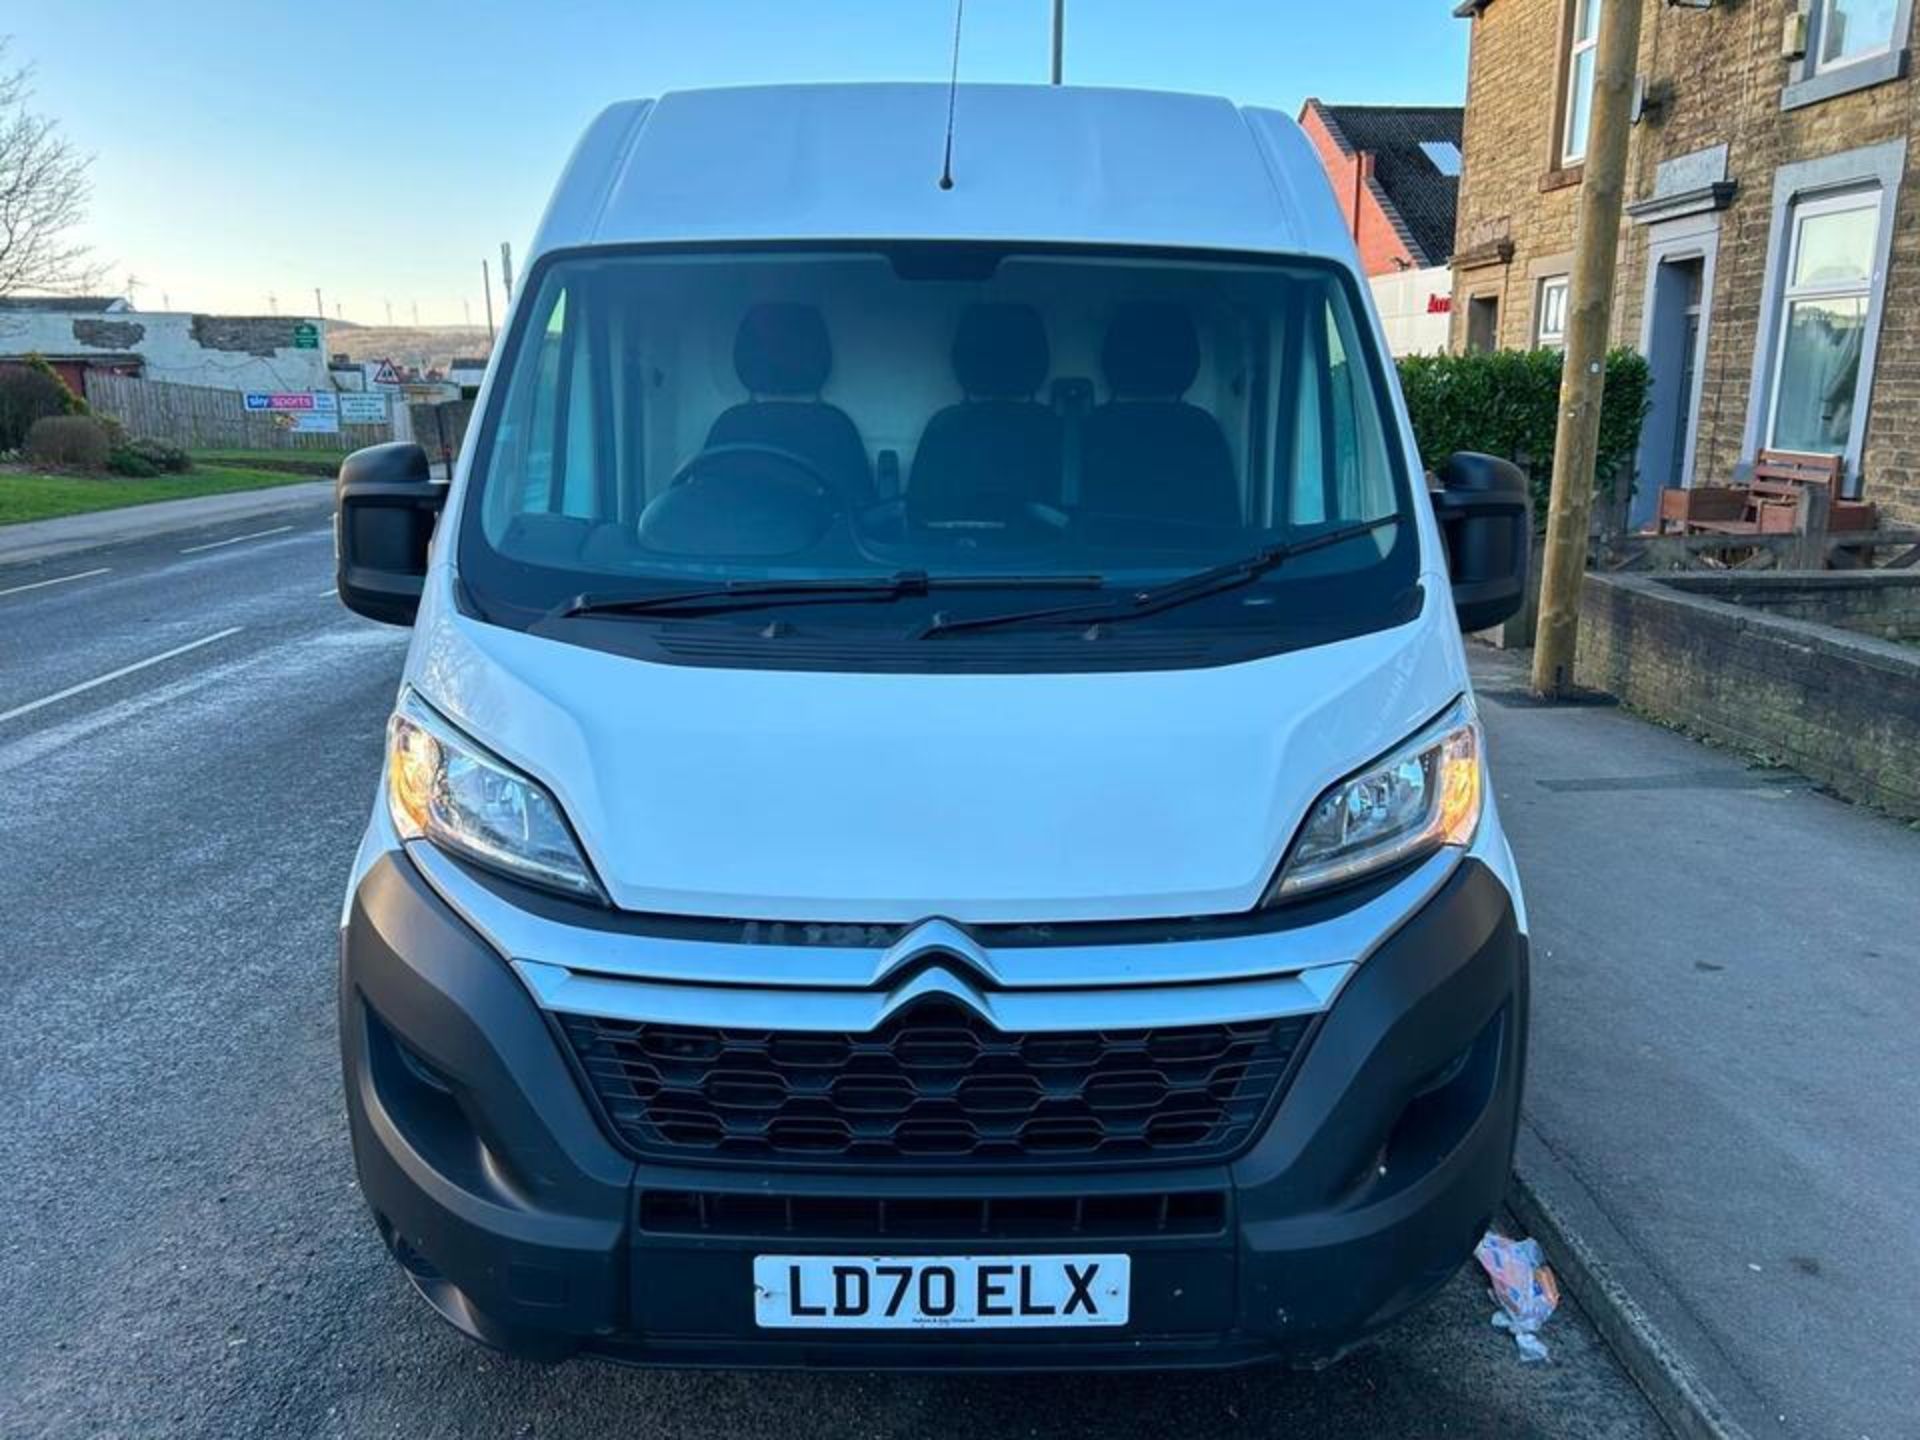 2020 CITROEN RELAY - ONLY 84K MILES -HPI CLEAR- READY FOR ROAD! - Image 3 of 13